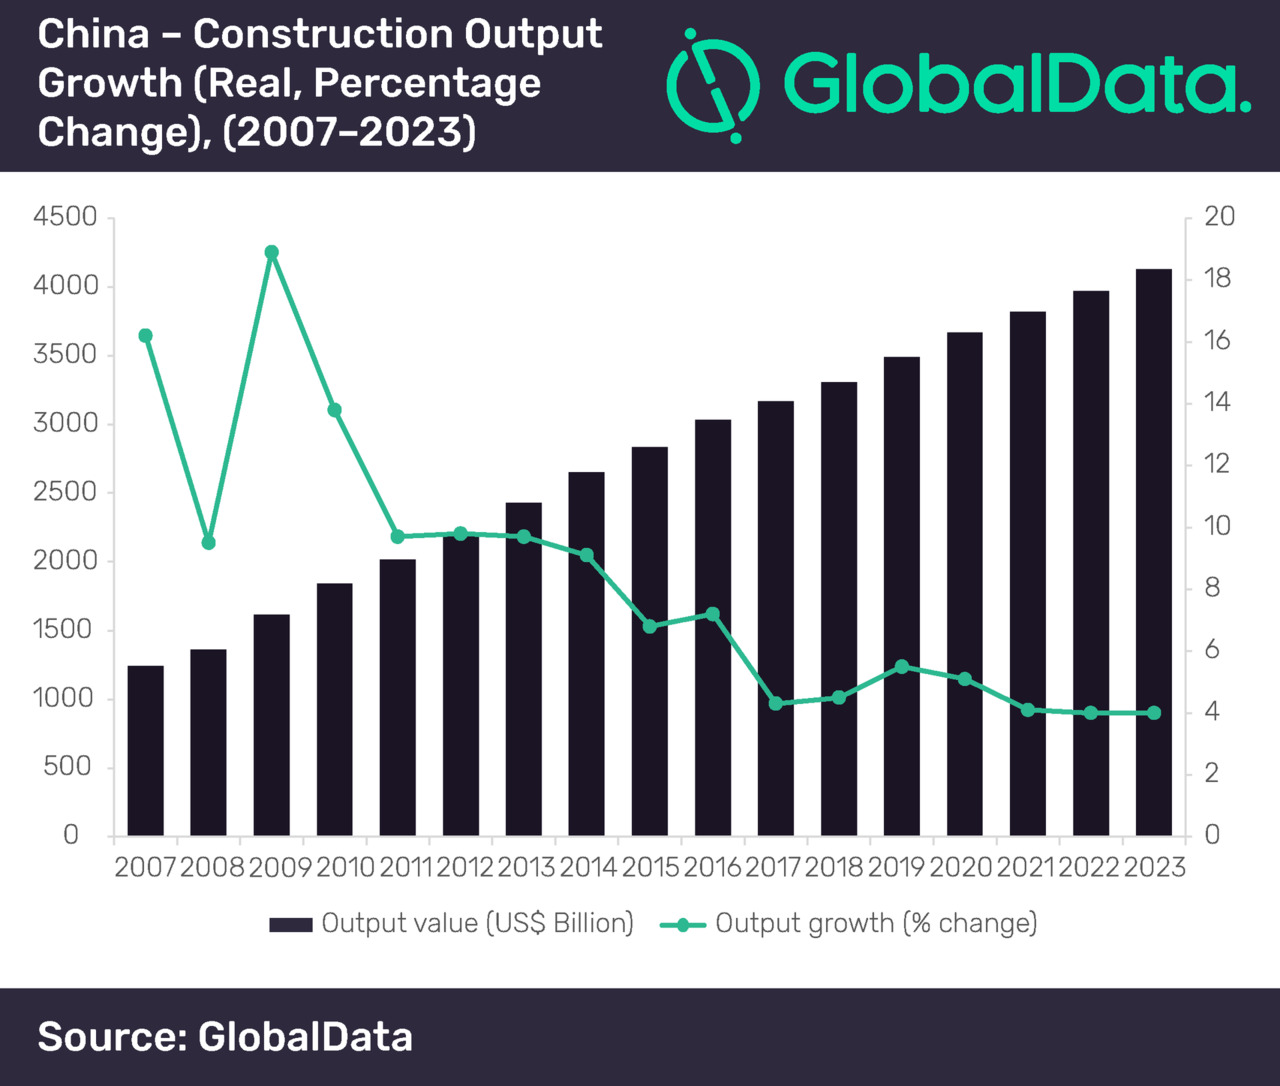 China Construction Industry Growth According to Global Data